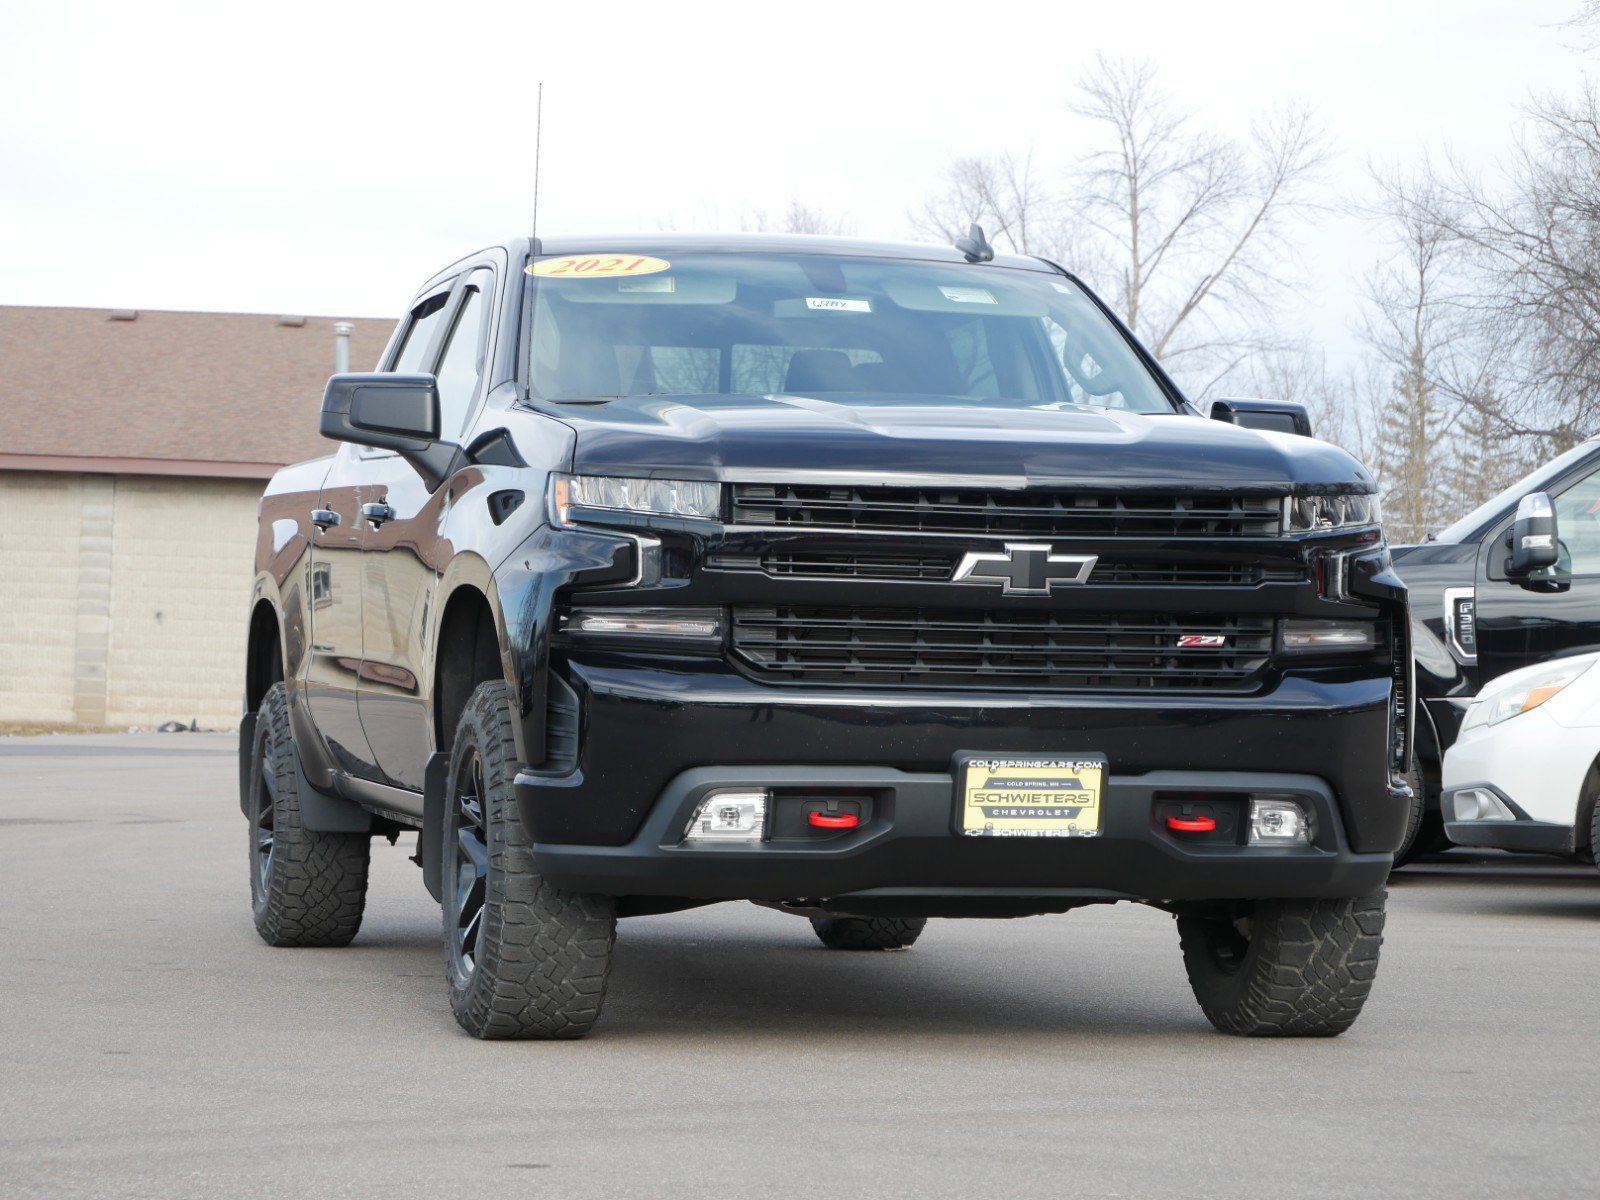 Used 2021 Chevrolet Silverado 1500 LT Trail Boss with VIN 1GCPYFED1MZ118761 for sale in Cold Spring, Minnesota